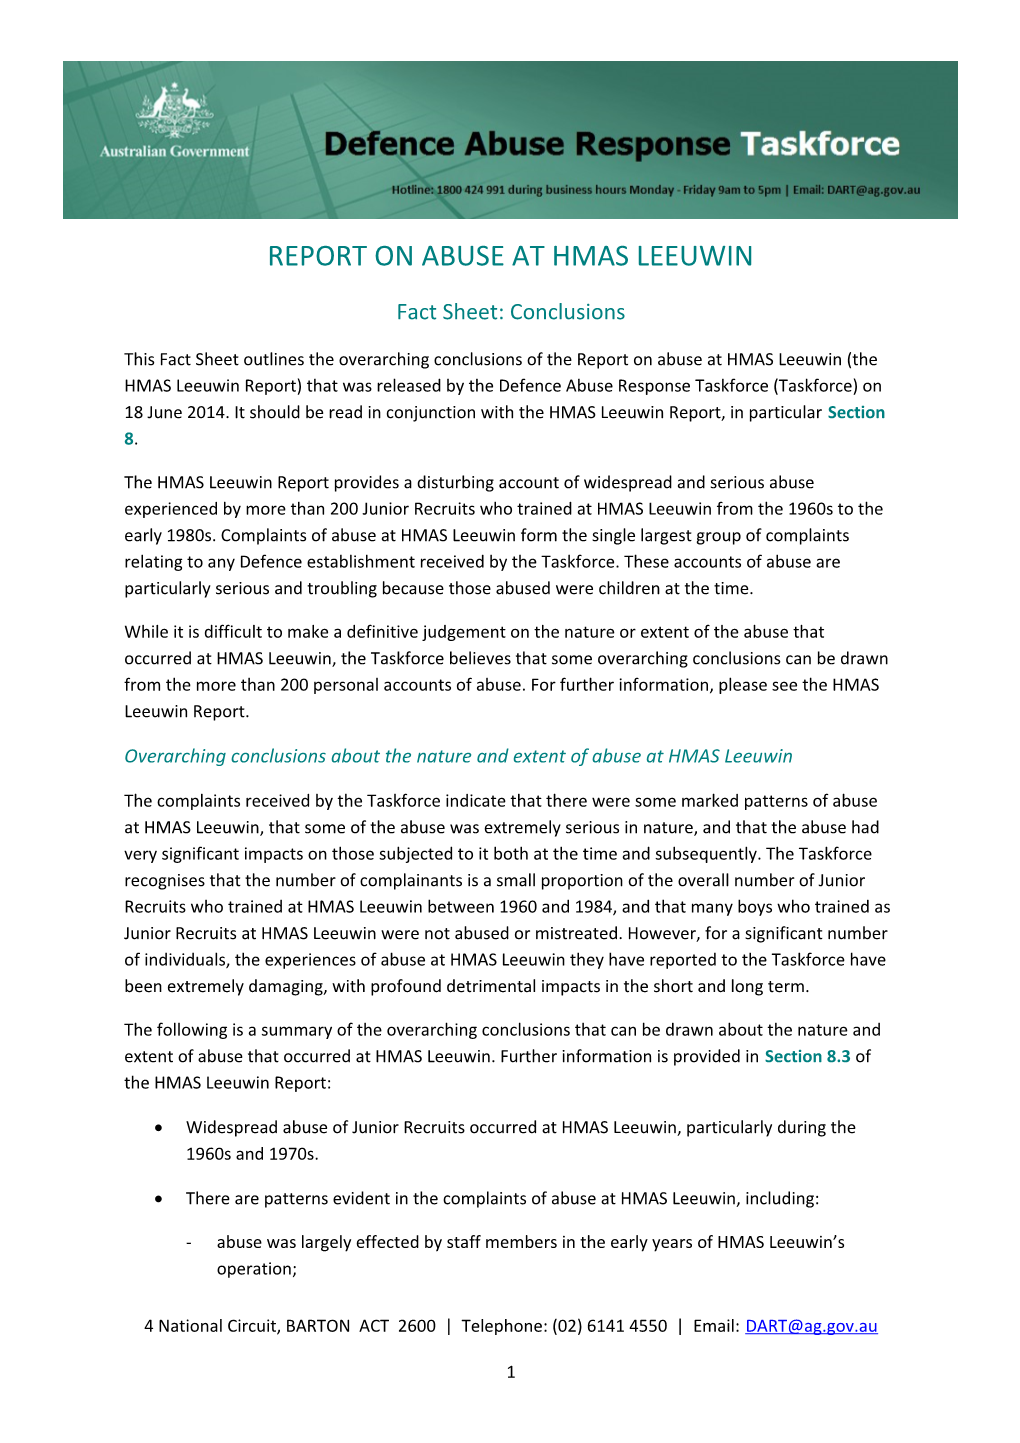 Summary of the Overarching Conclusions of the HMAS Leeuwin Report